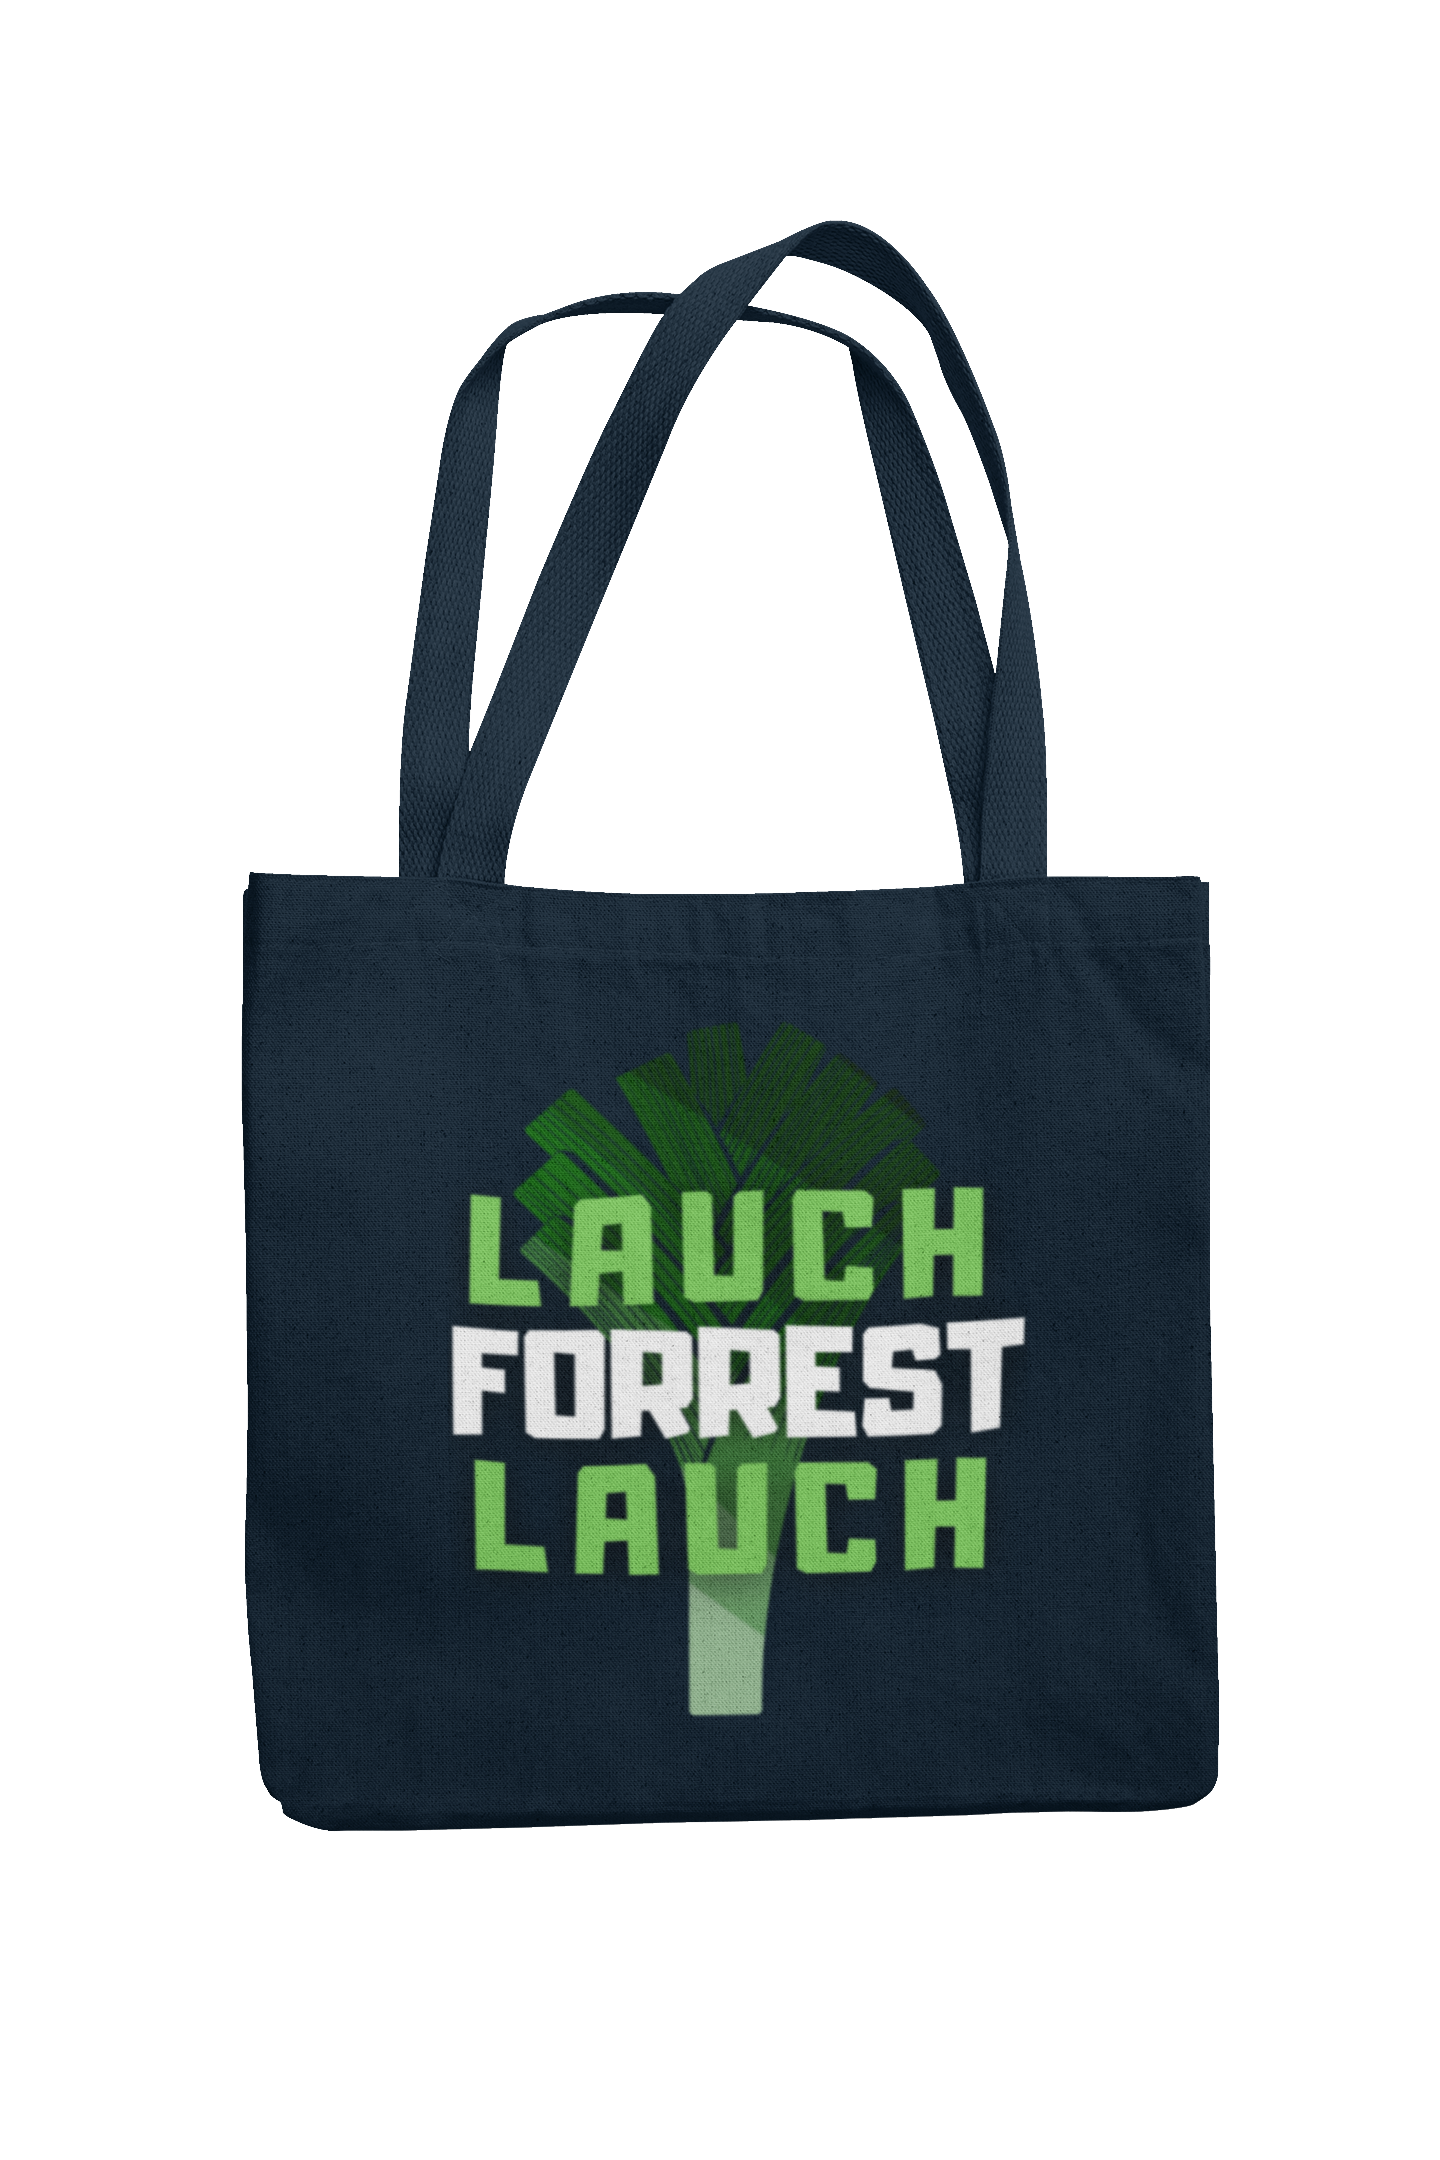 Lauch Forrest Lauch - Tote-Bag